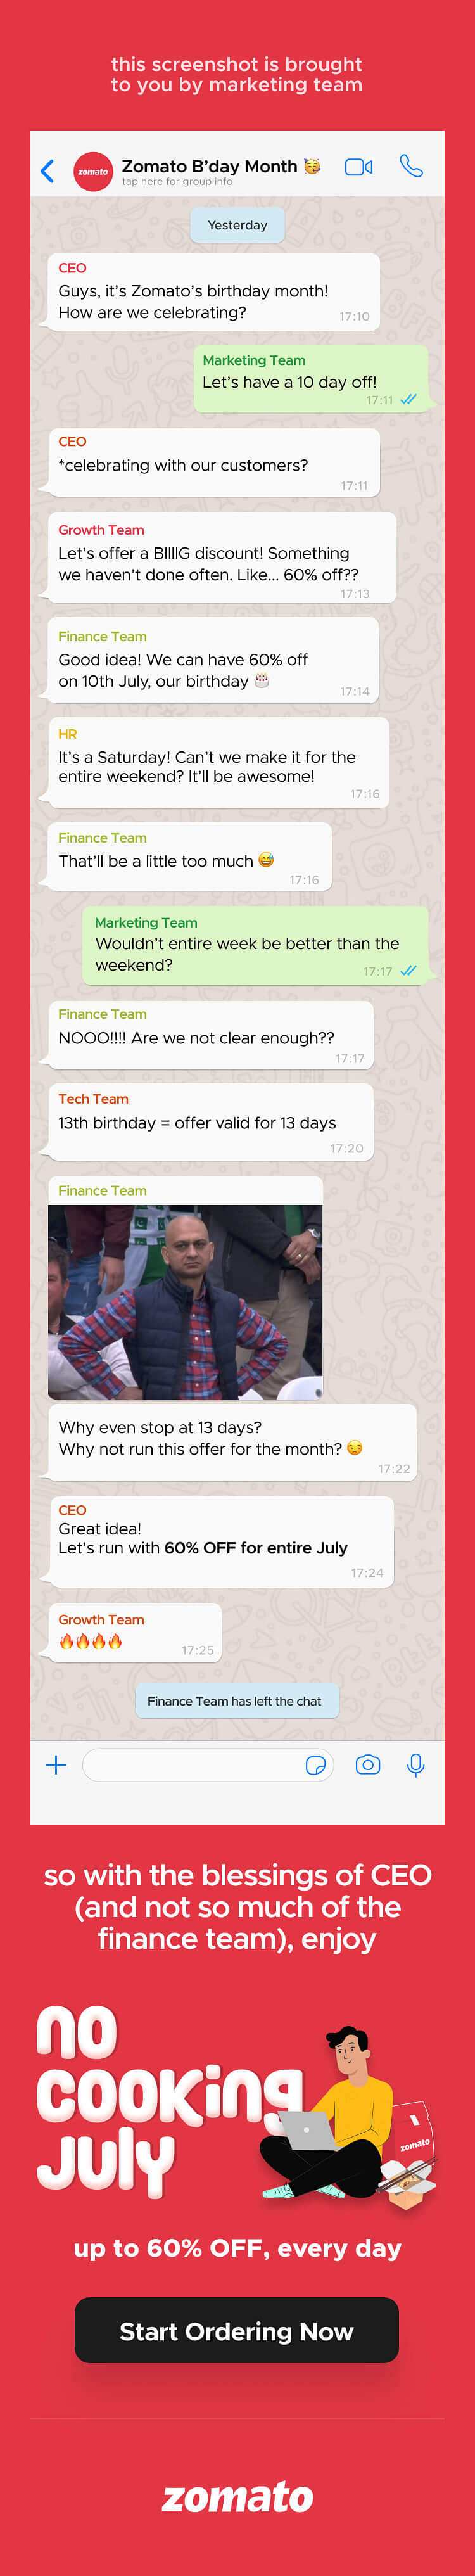 Zomato’s ‘leaked’ WhatsApp chat reveals the brainstorming behind its birthday month gift for users